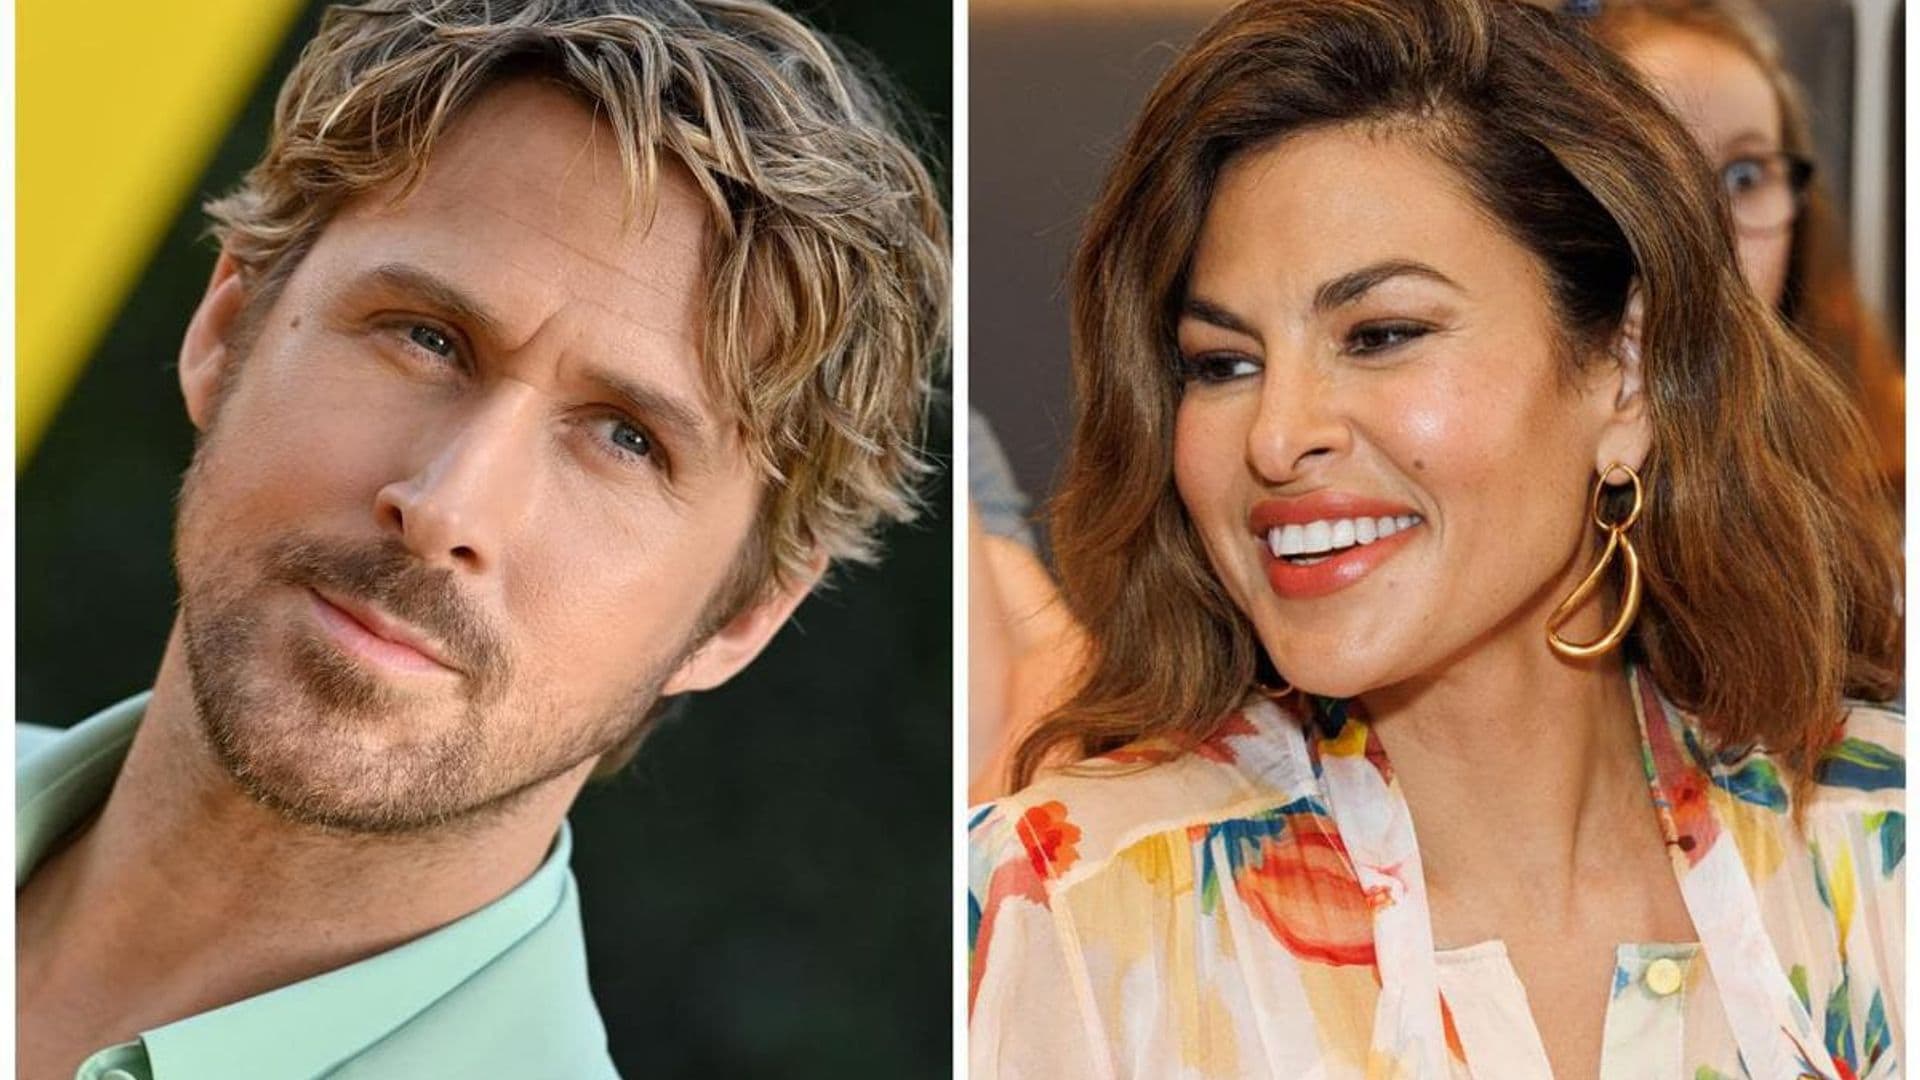 Ryan Gosling, in awe of Eva Mendes’ beauty, influence, and support, shares his feelings at ‘The Fall Guy’ premiere